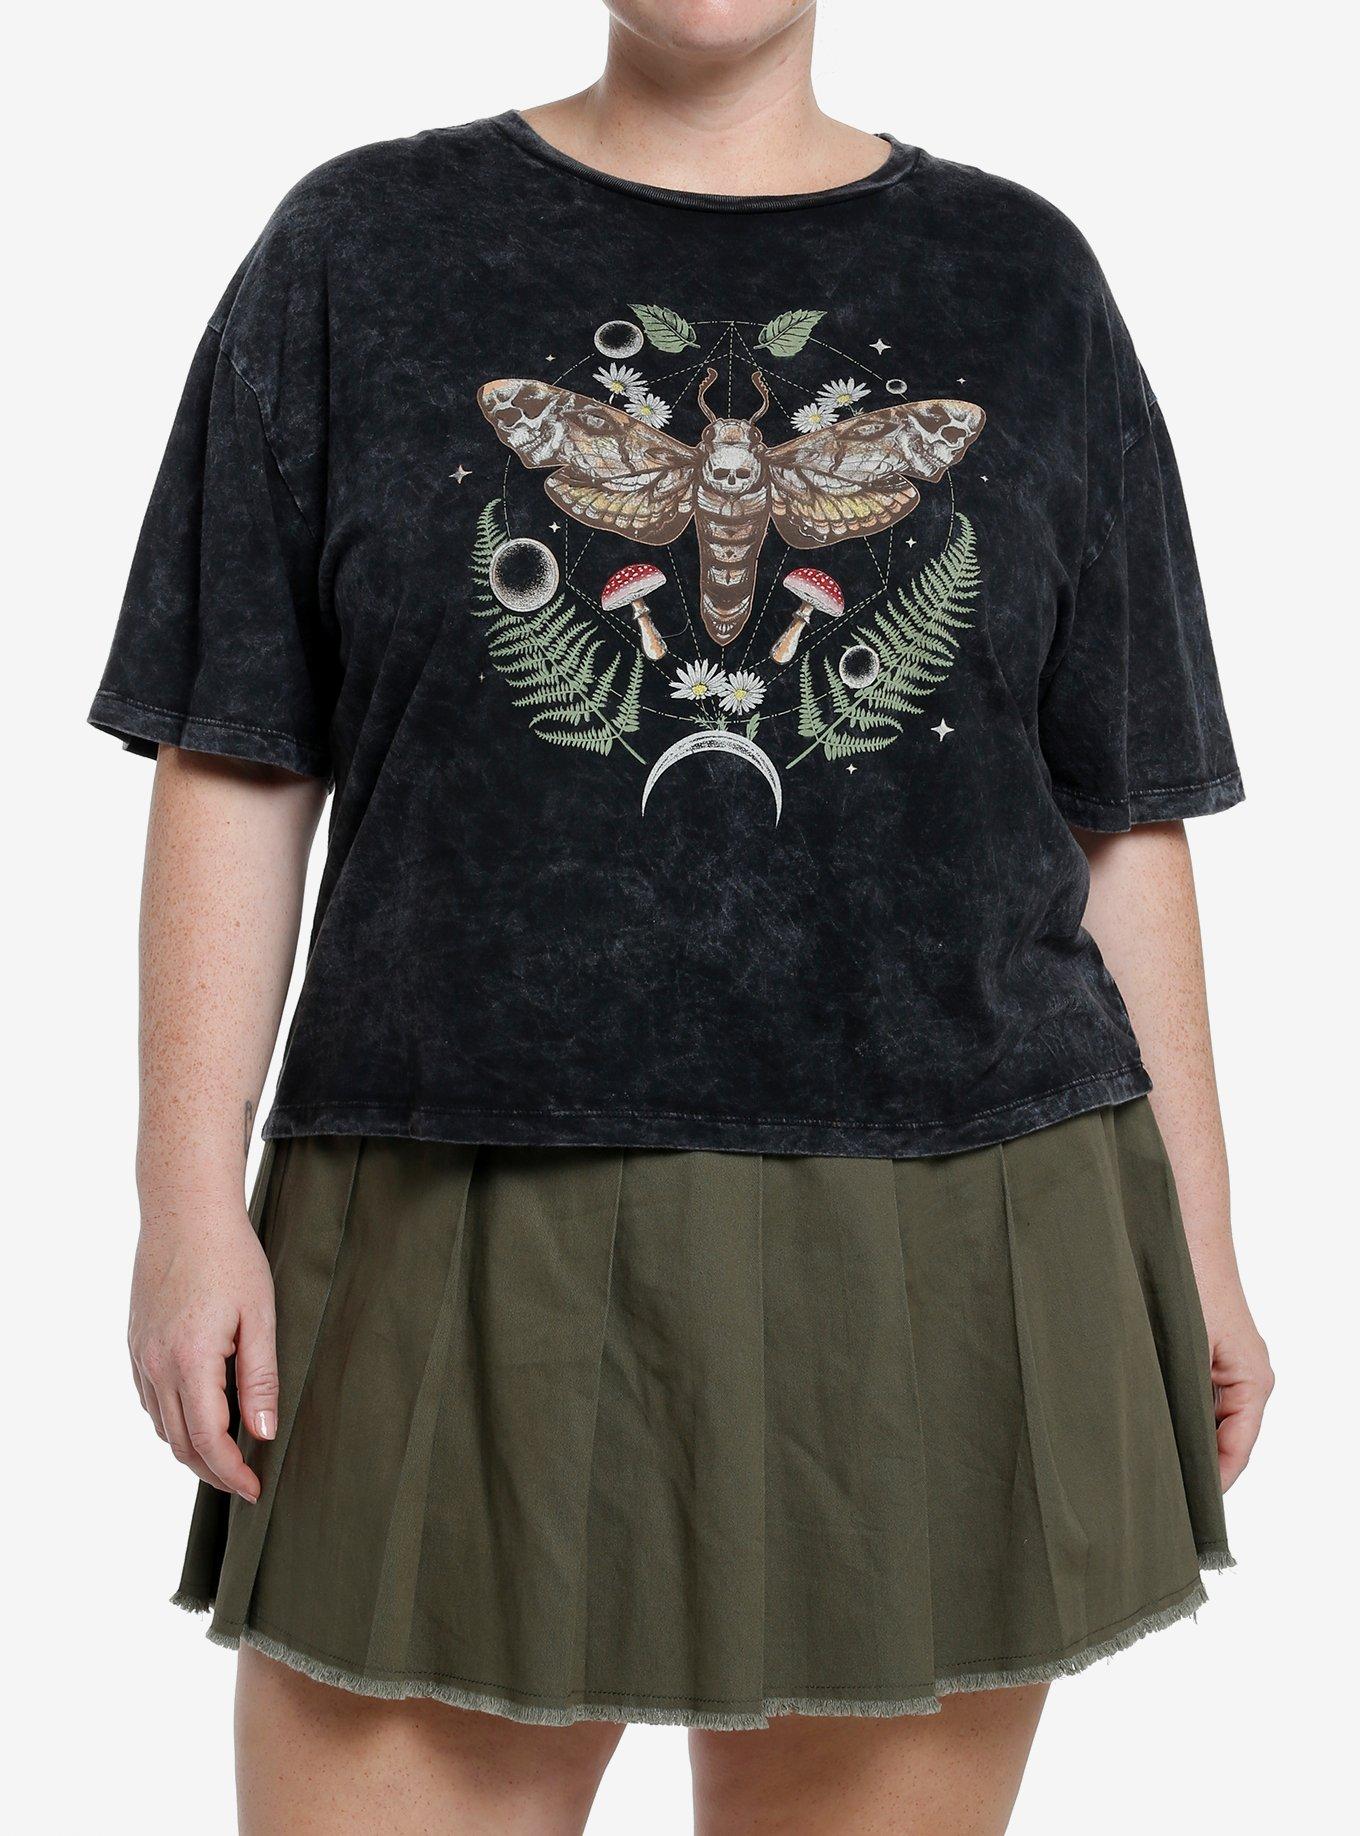 Thorn & Fable Moth Mushrooms Mineral Wash Girls Crop T-Shirt Plus Size, BROWN, hi-res